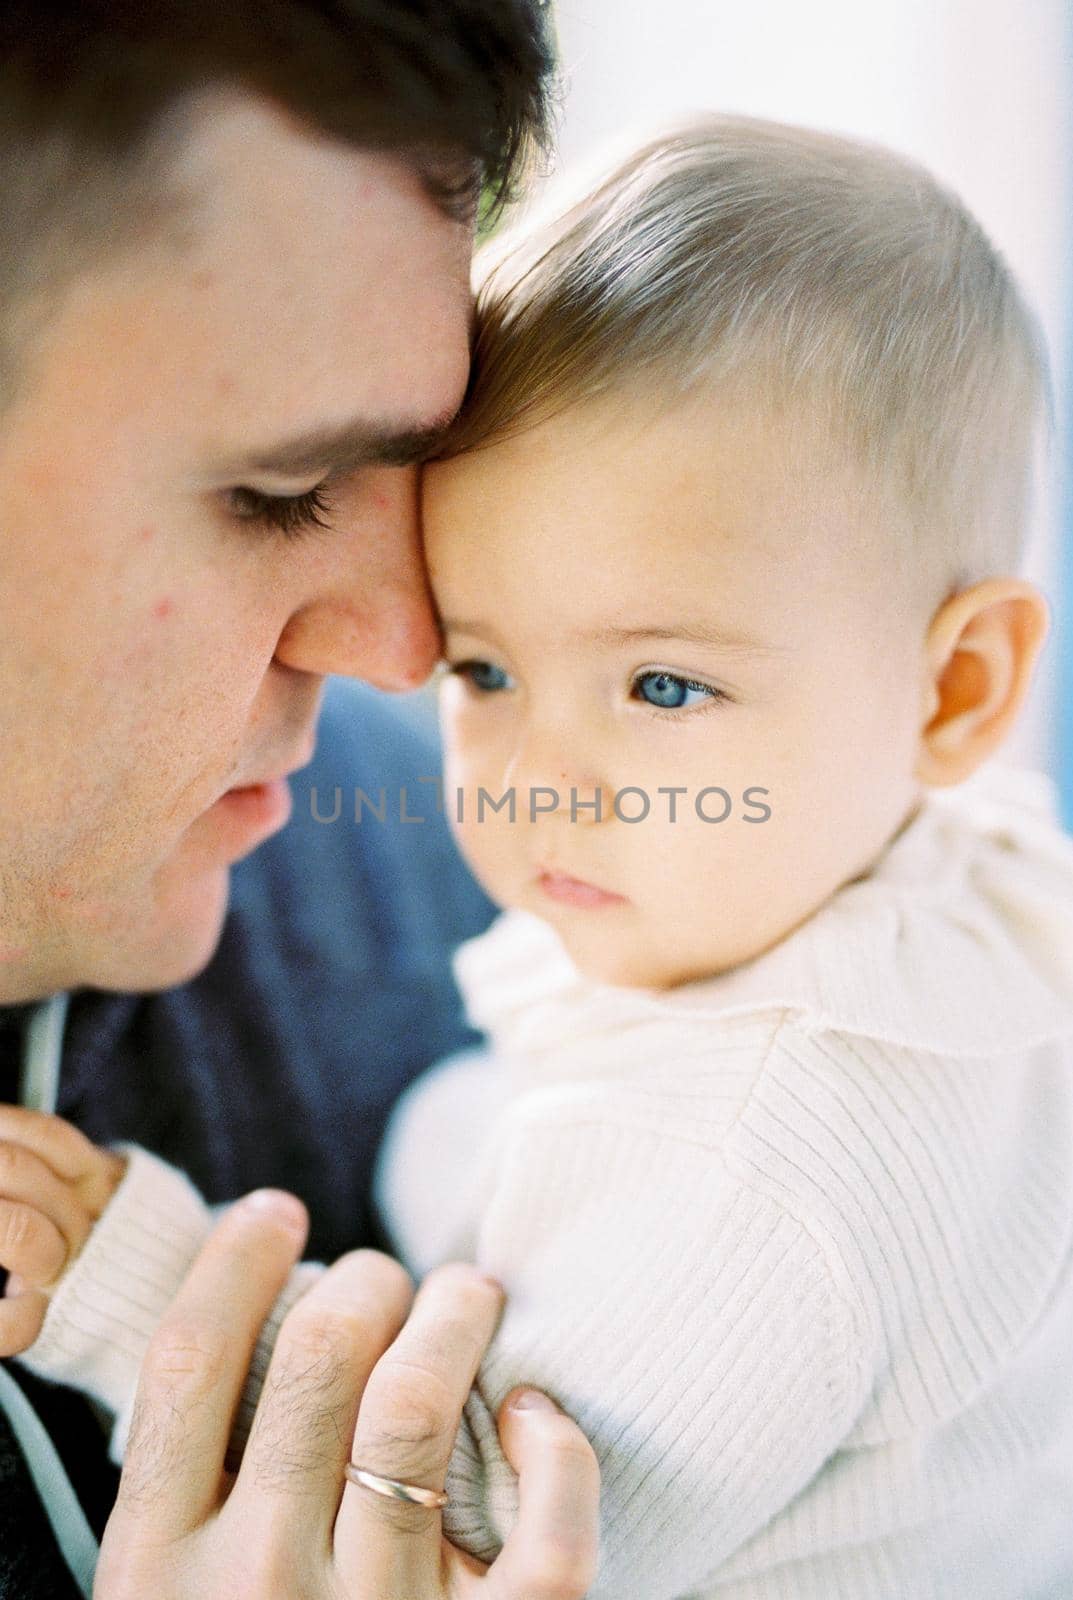 Dad touches the forehead of the baby with his nose, holding his hand with his fingers. Portrait by Nadtochiy